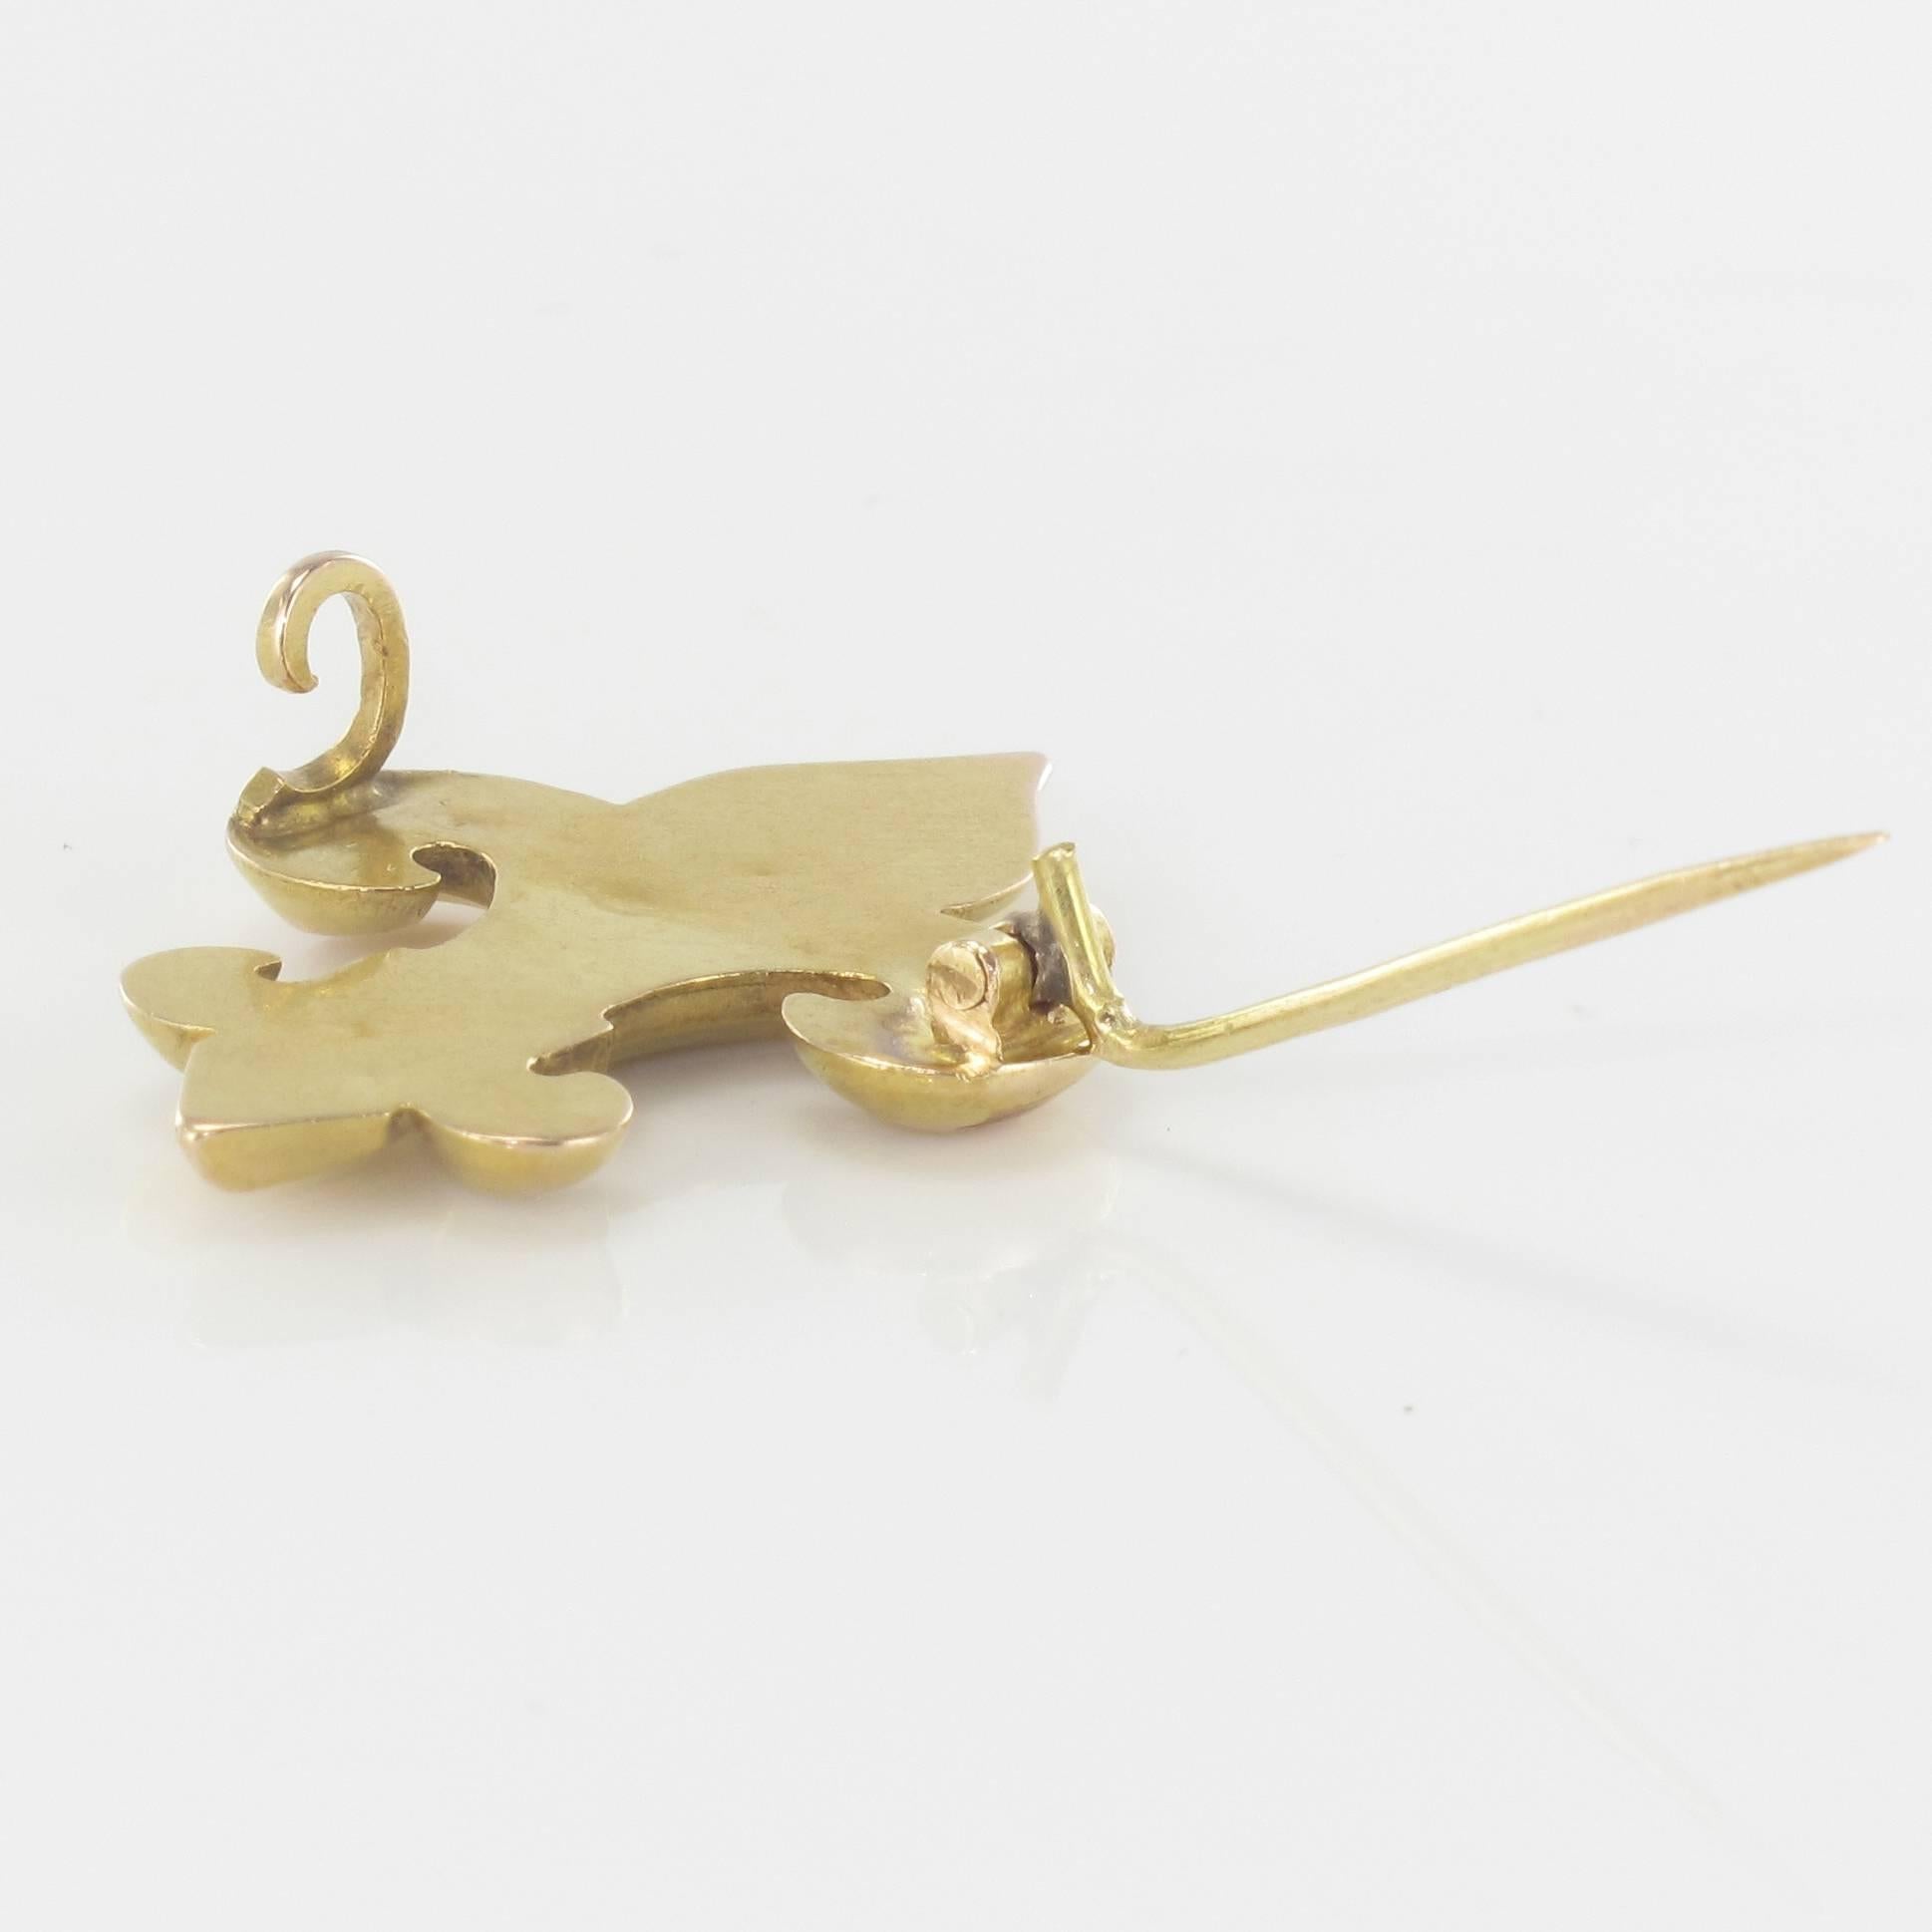 Brooch in 18 carats yellow gold, eagle's head hallmark.
It represents a fleur de lys tightened on the bottom by a gold link which is set with 3 half natural pearls. The clasp is a pin with safety hook.
Height: 3 cm, width 2.1 cm, widest thickness: